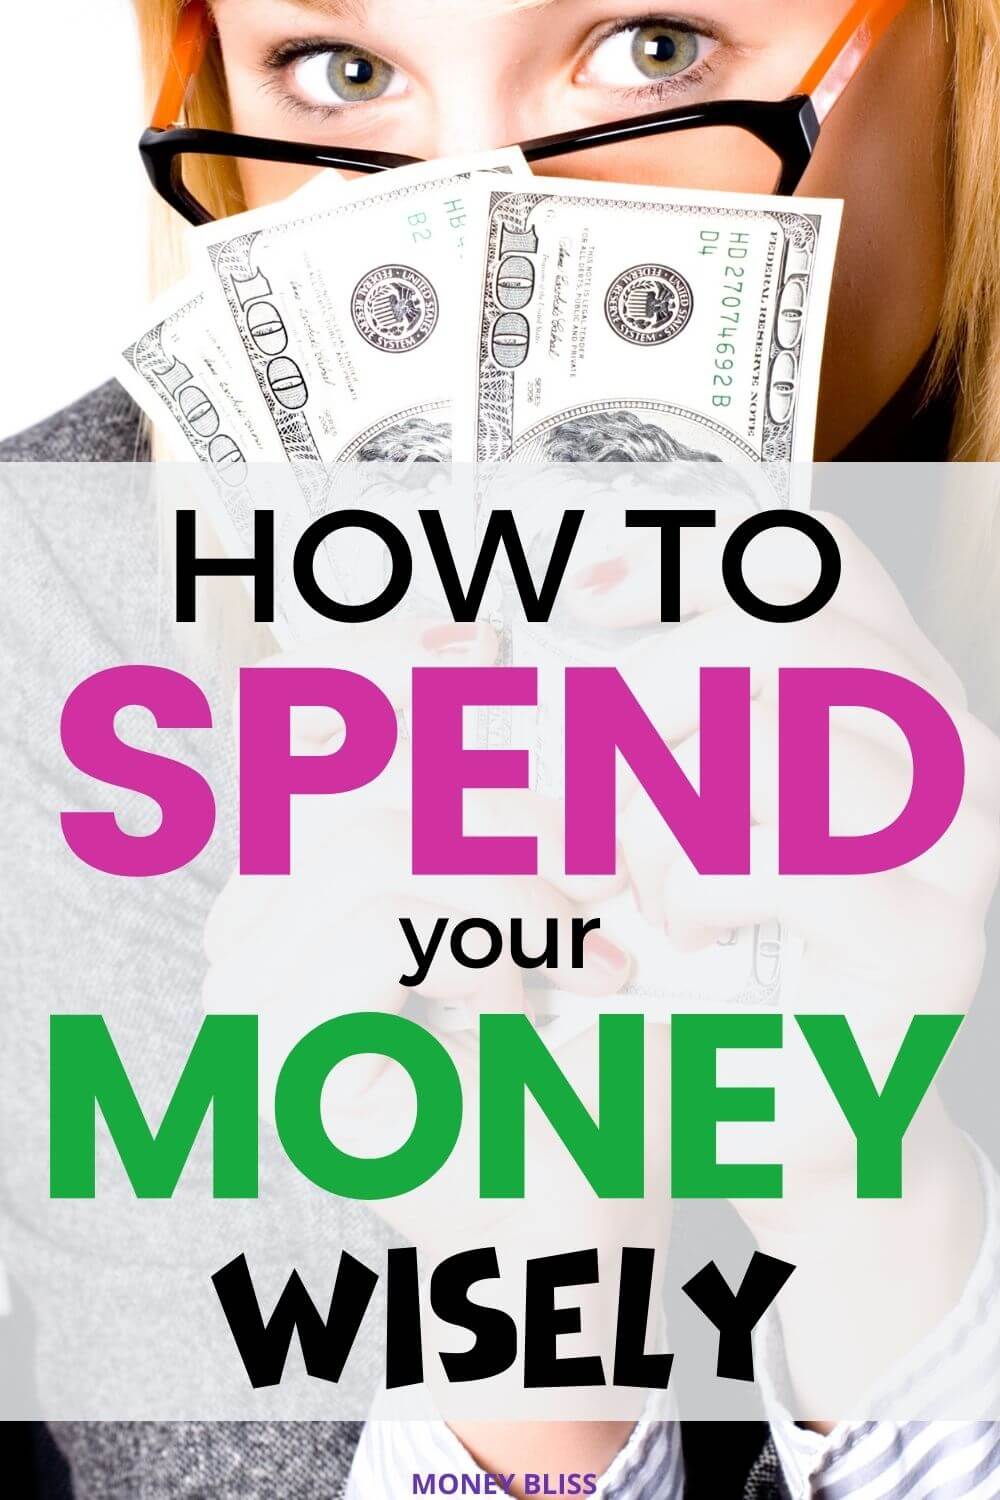 Learn how to spend money wisely by following these 10 hacks. Follow the advice to avoid wasting money on unnecessary purchases, improve your financial habits, and stop spending too much.